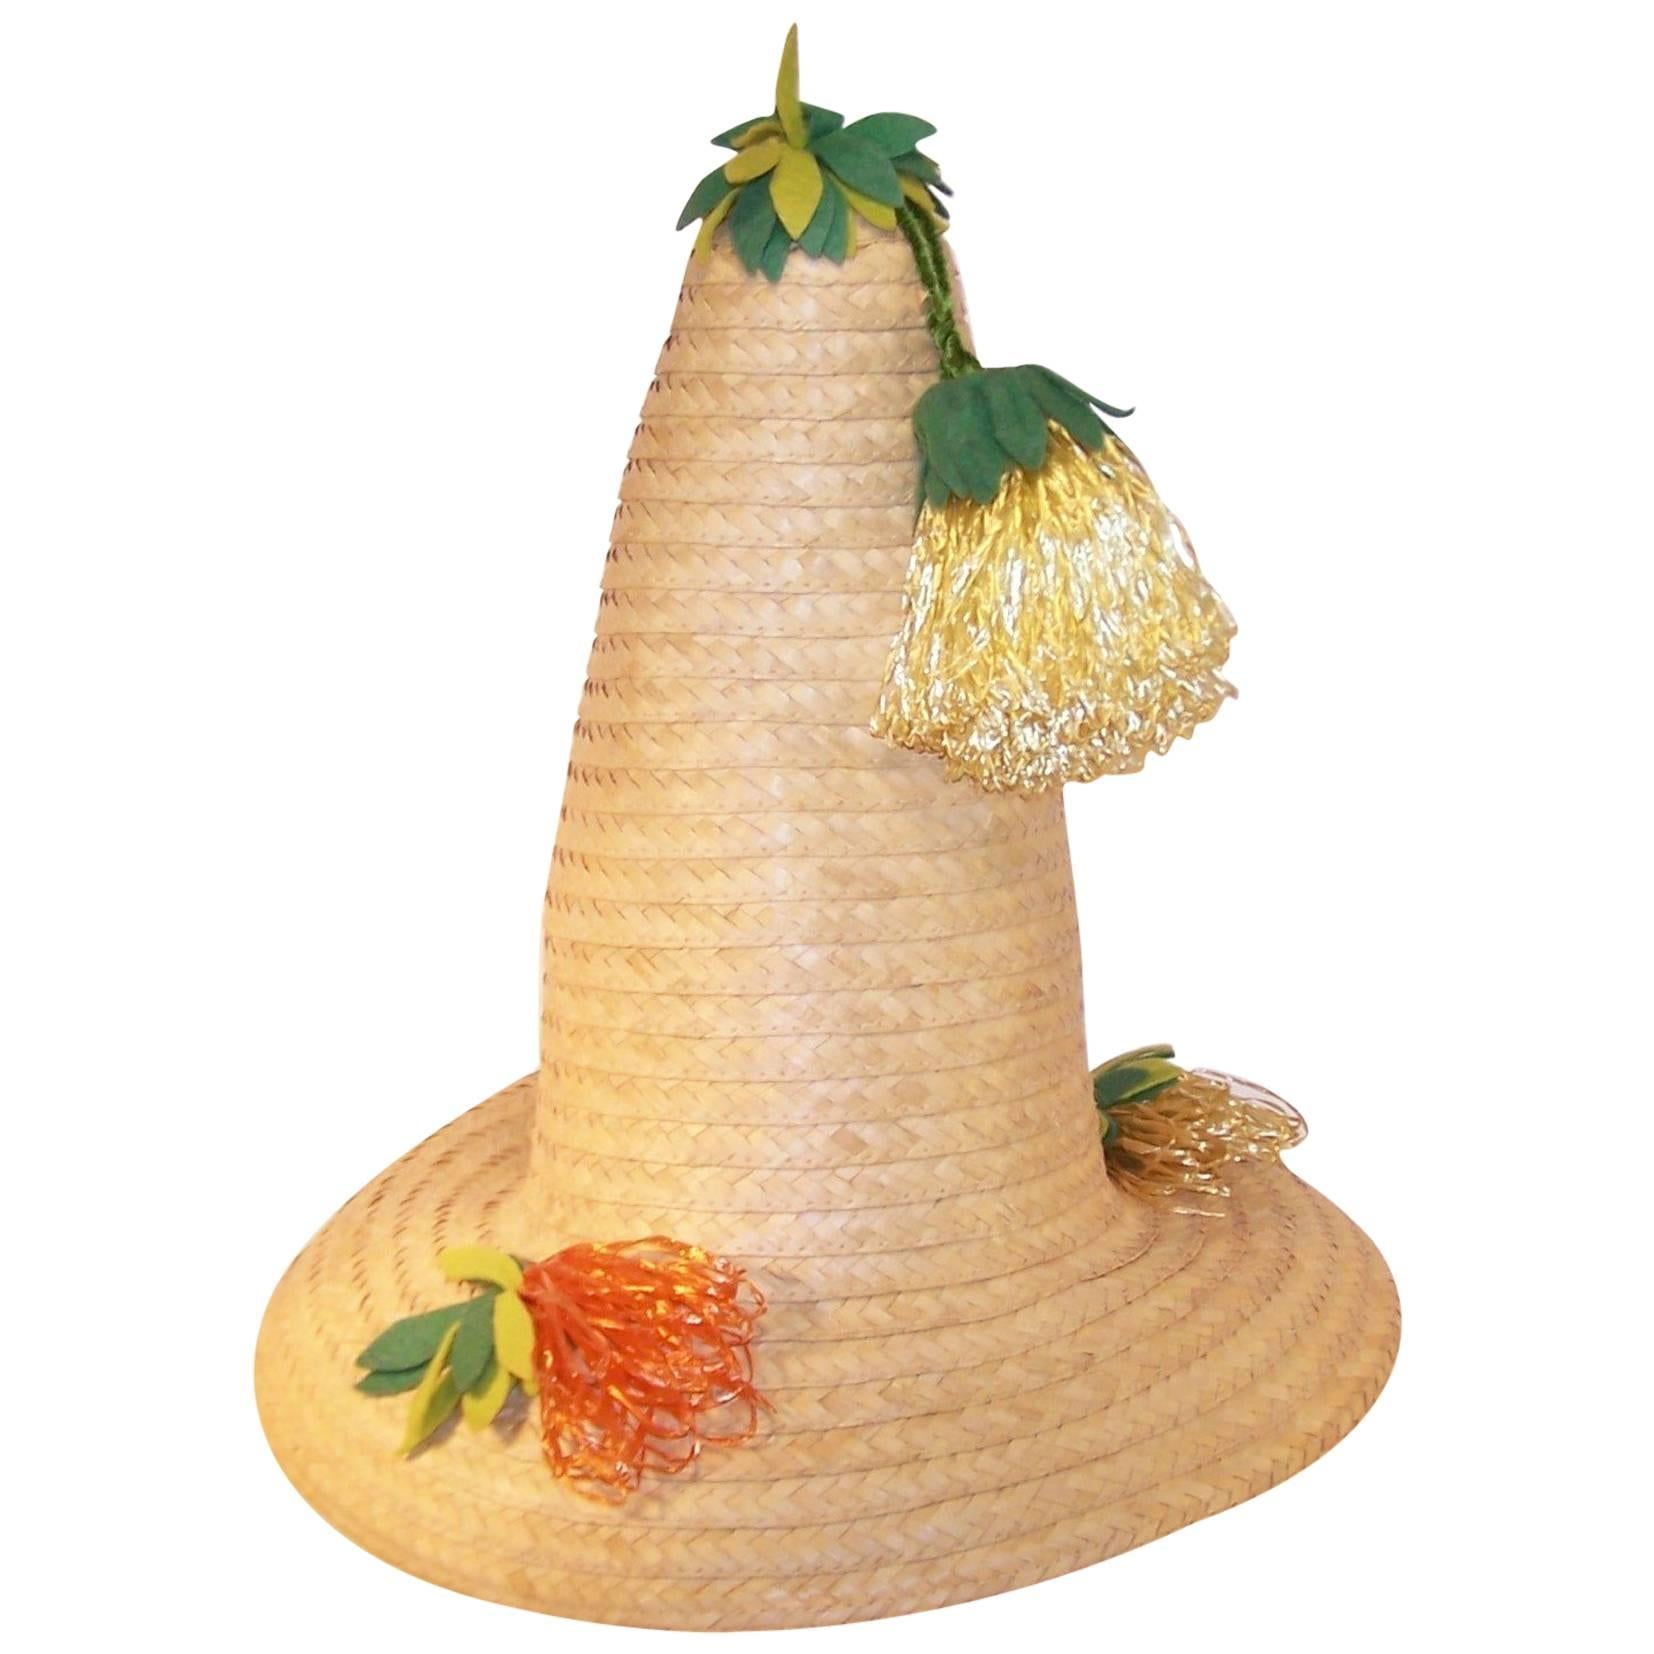 Whimsical 1950's Conical Novelty Straw Beach Hat